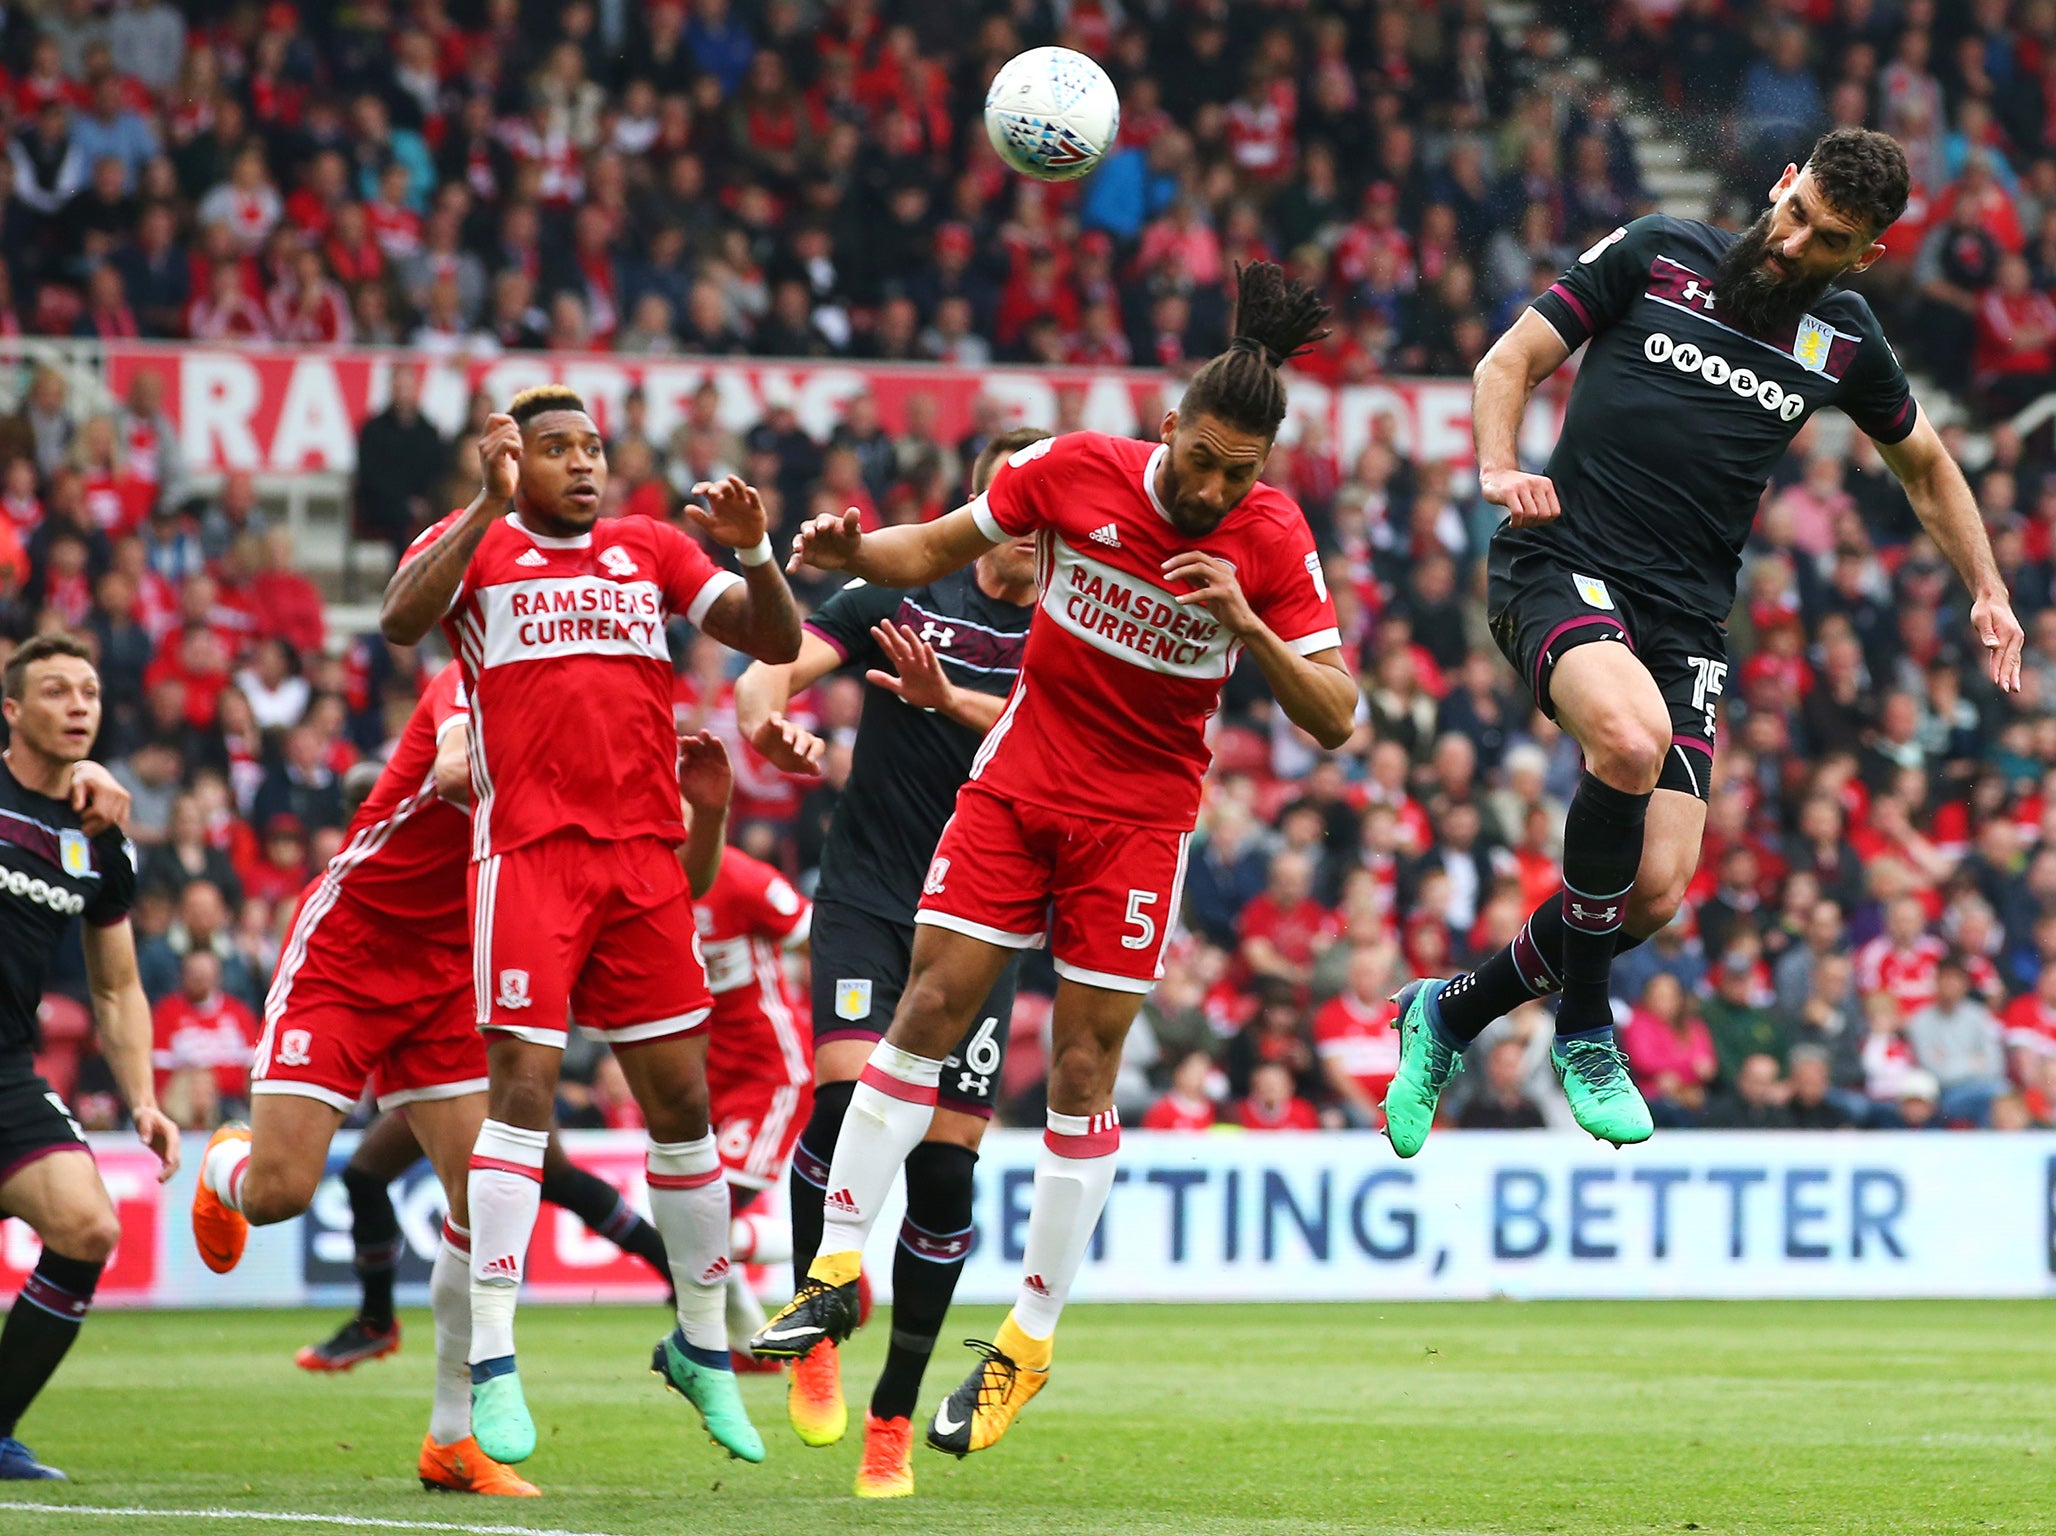 Mile Jedinak&apos;s header gives Aston Villa narrow lead over Middlesbrough in Championship play-off semi-final